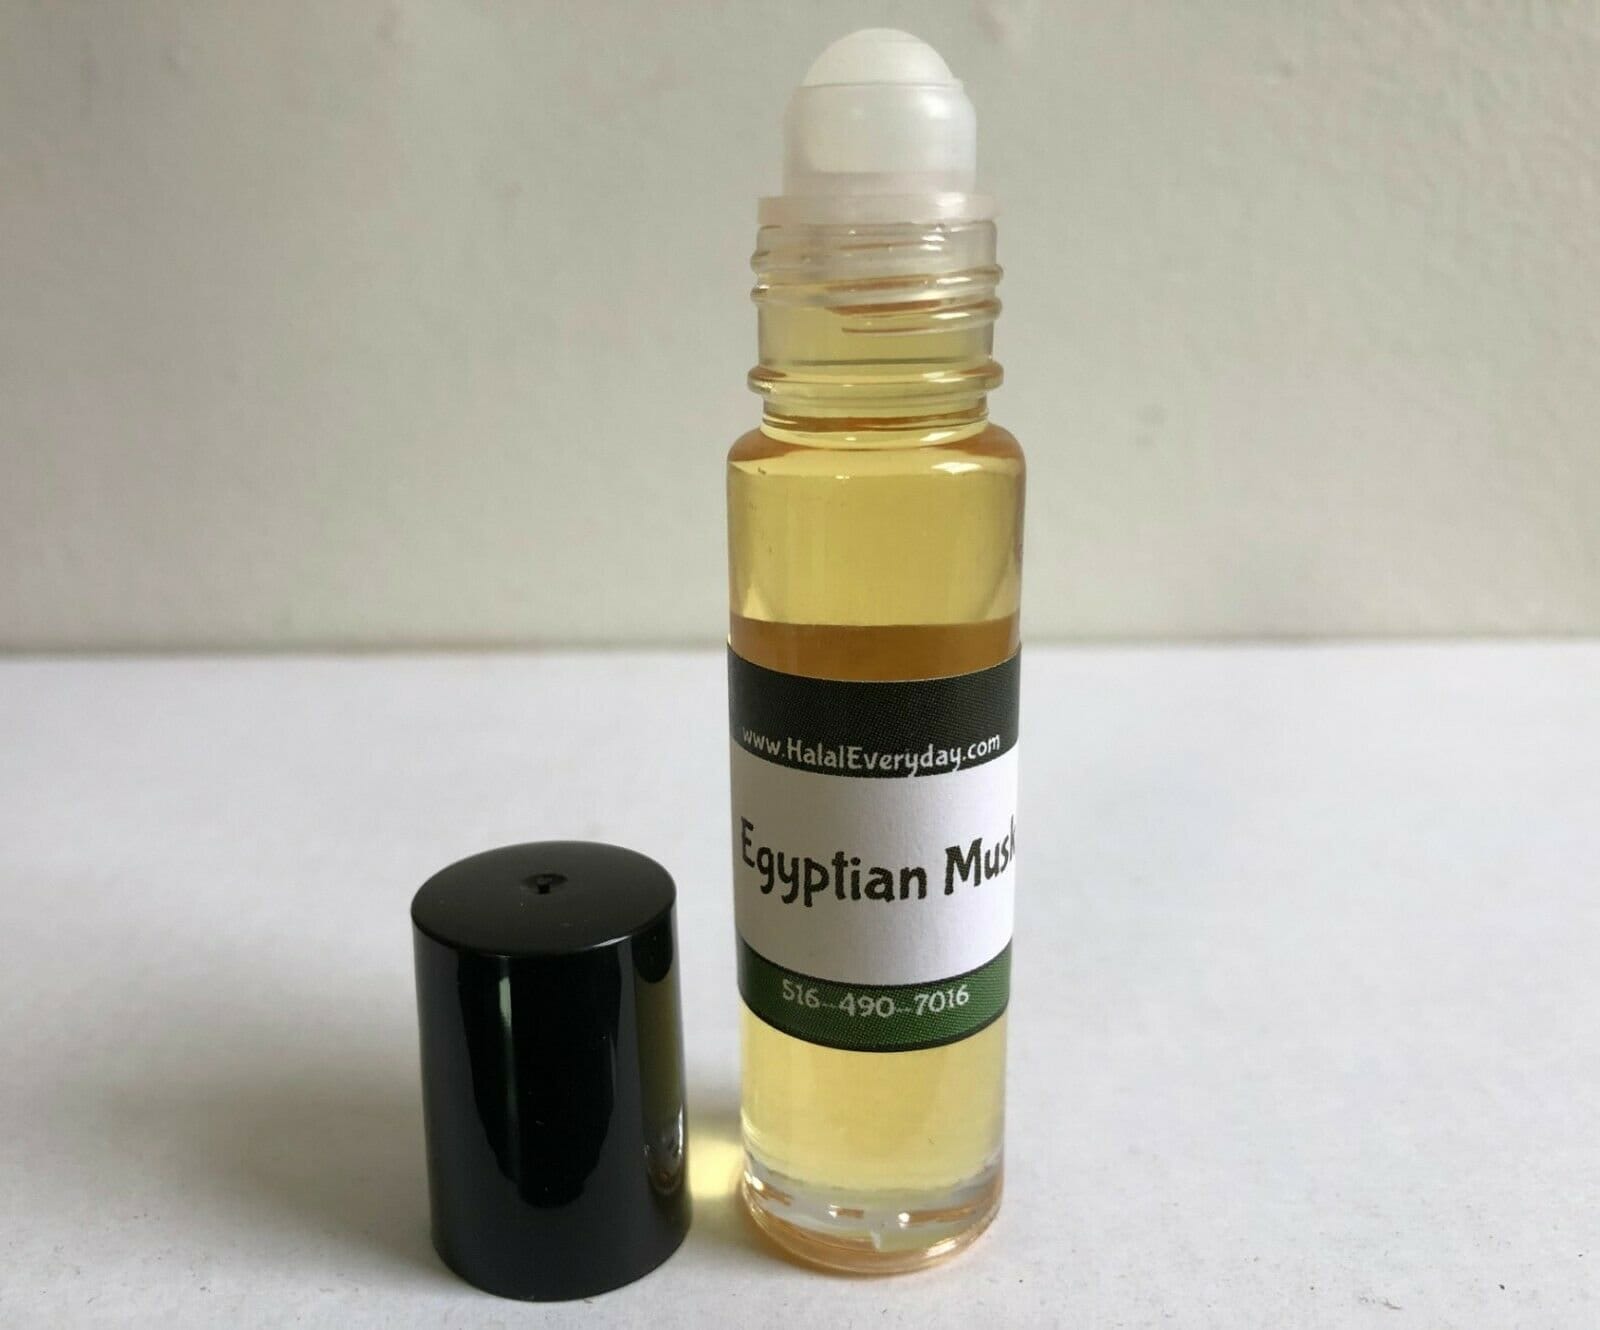 10ml. Roller Egyptian Musk Fragrance / Body Oil - Thick & Uncut PREMIUM  QUALITY Unisex Scent